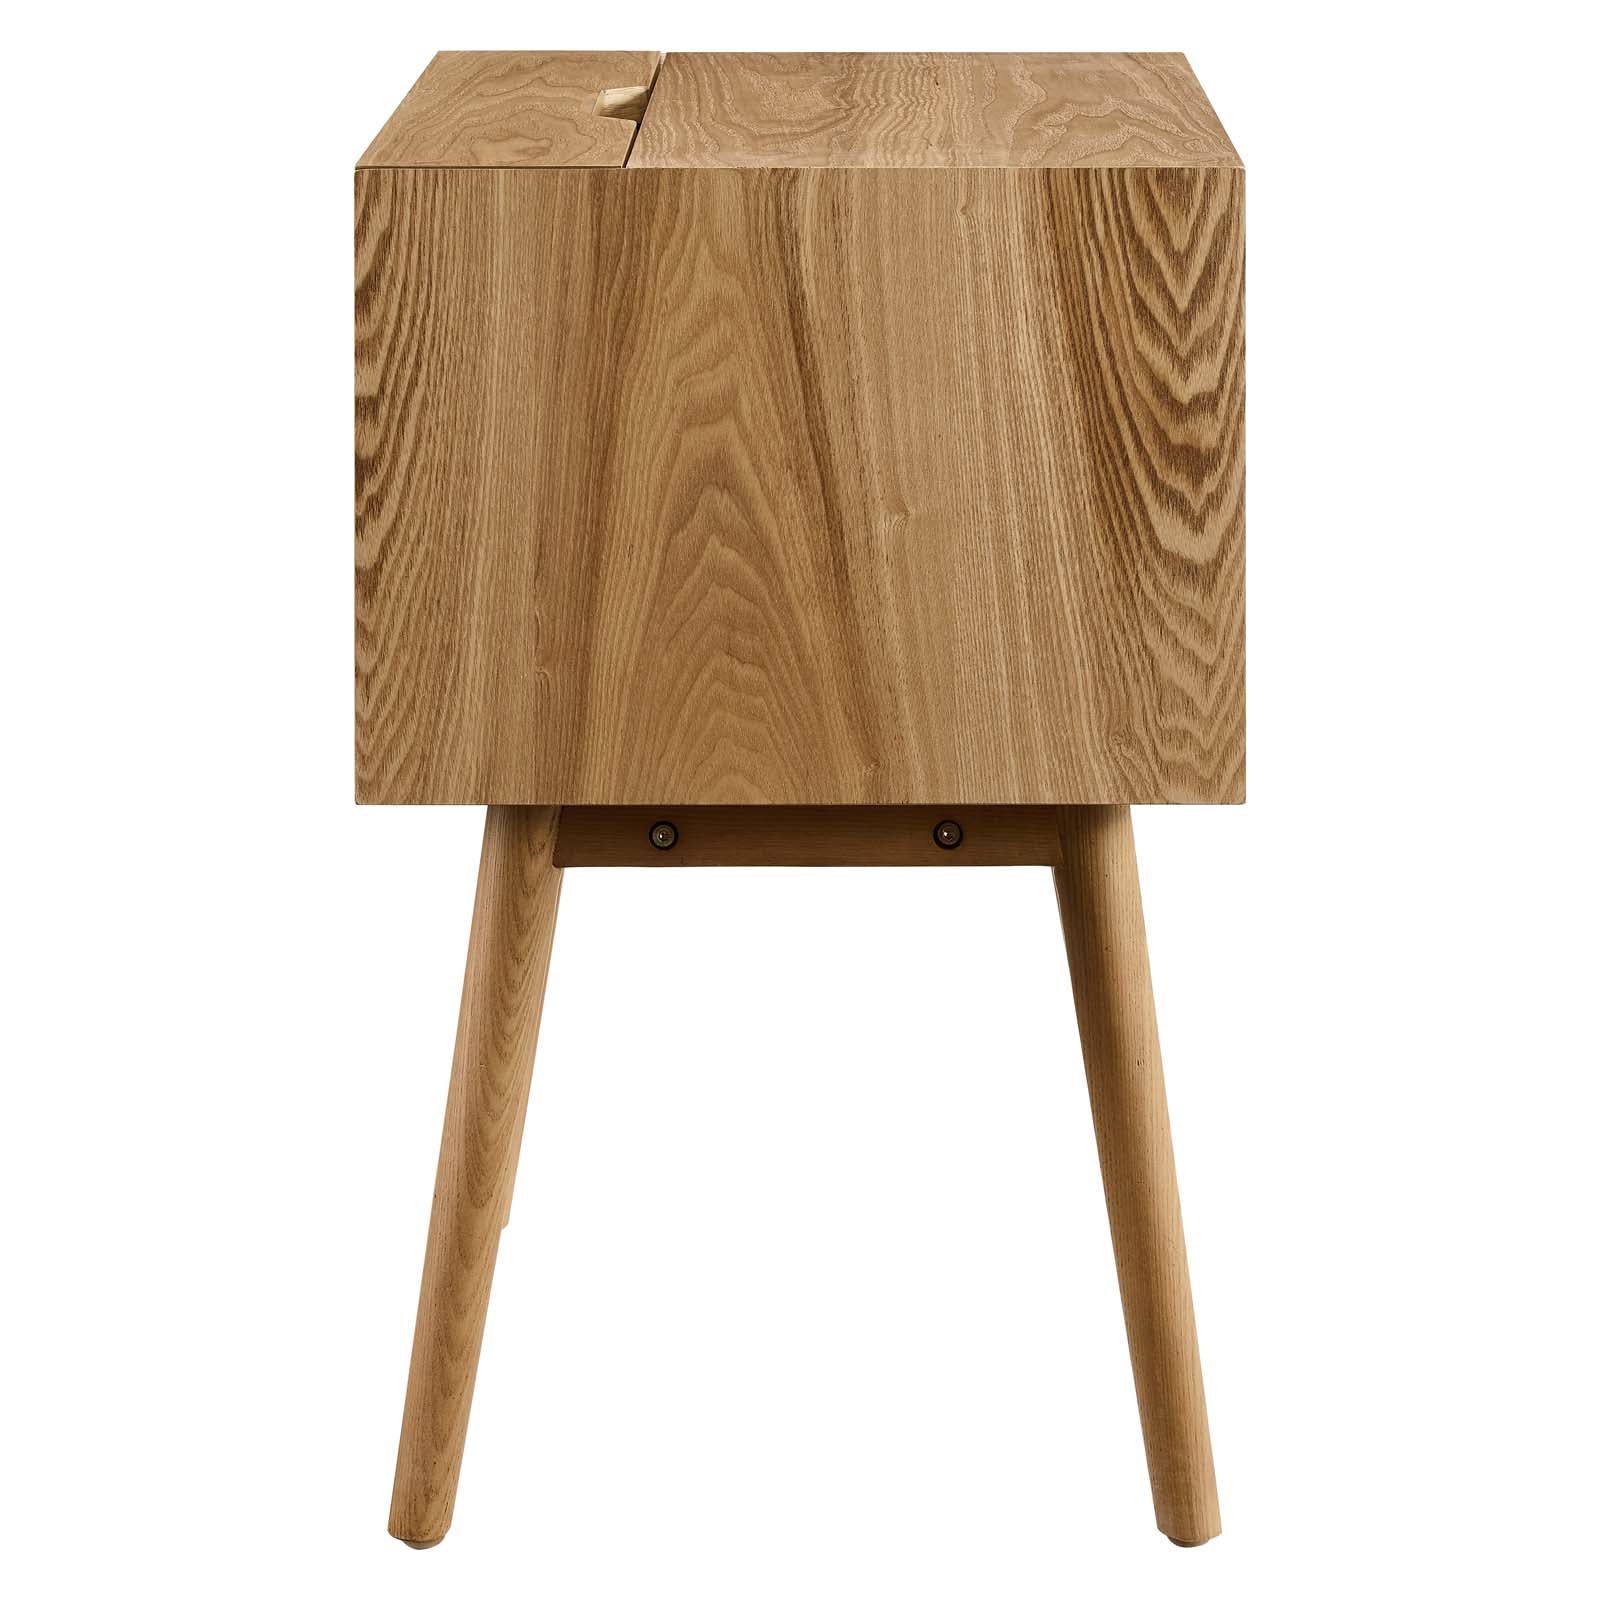 Modway Nightstands & Side Tables - Ember Wood Nightstand With USB Ports Natural White